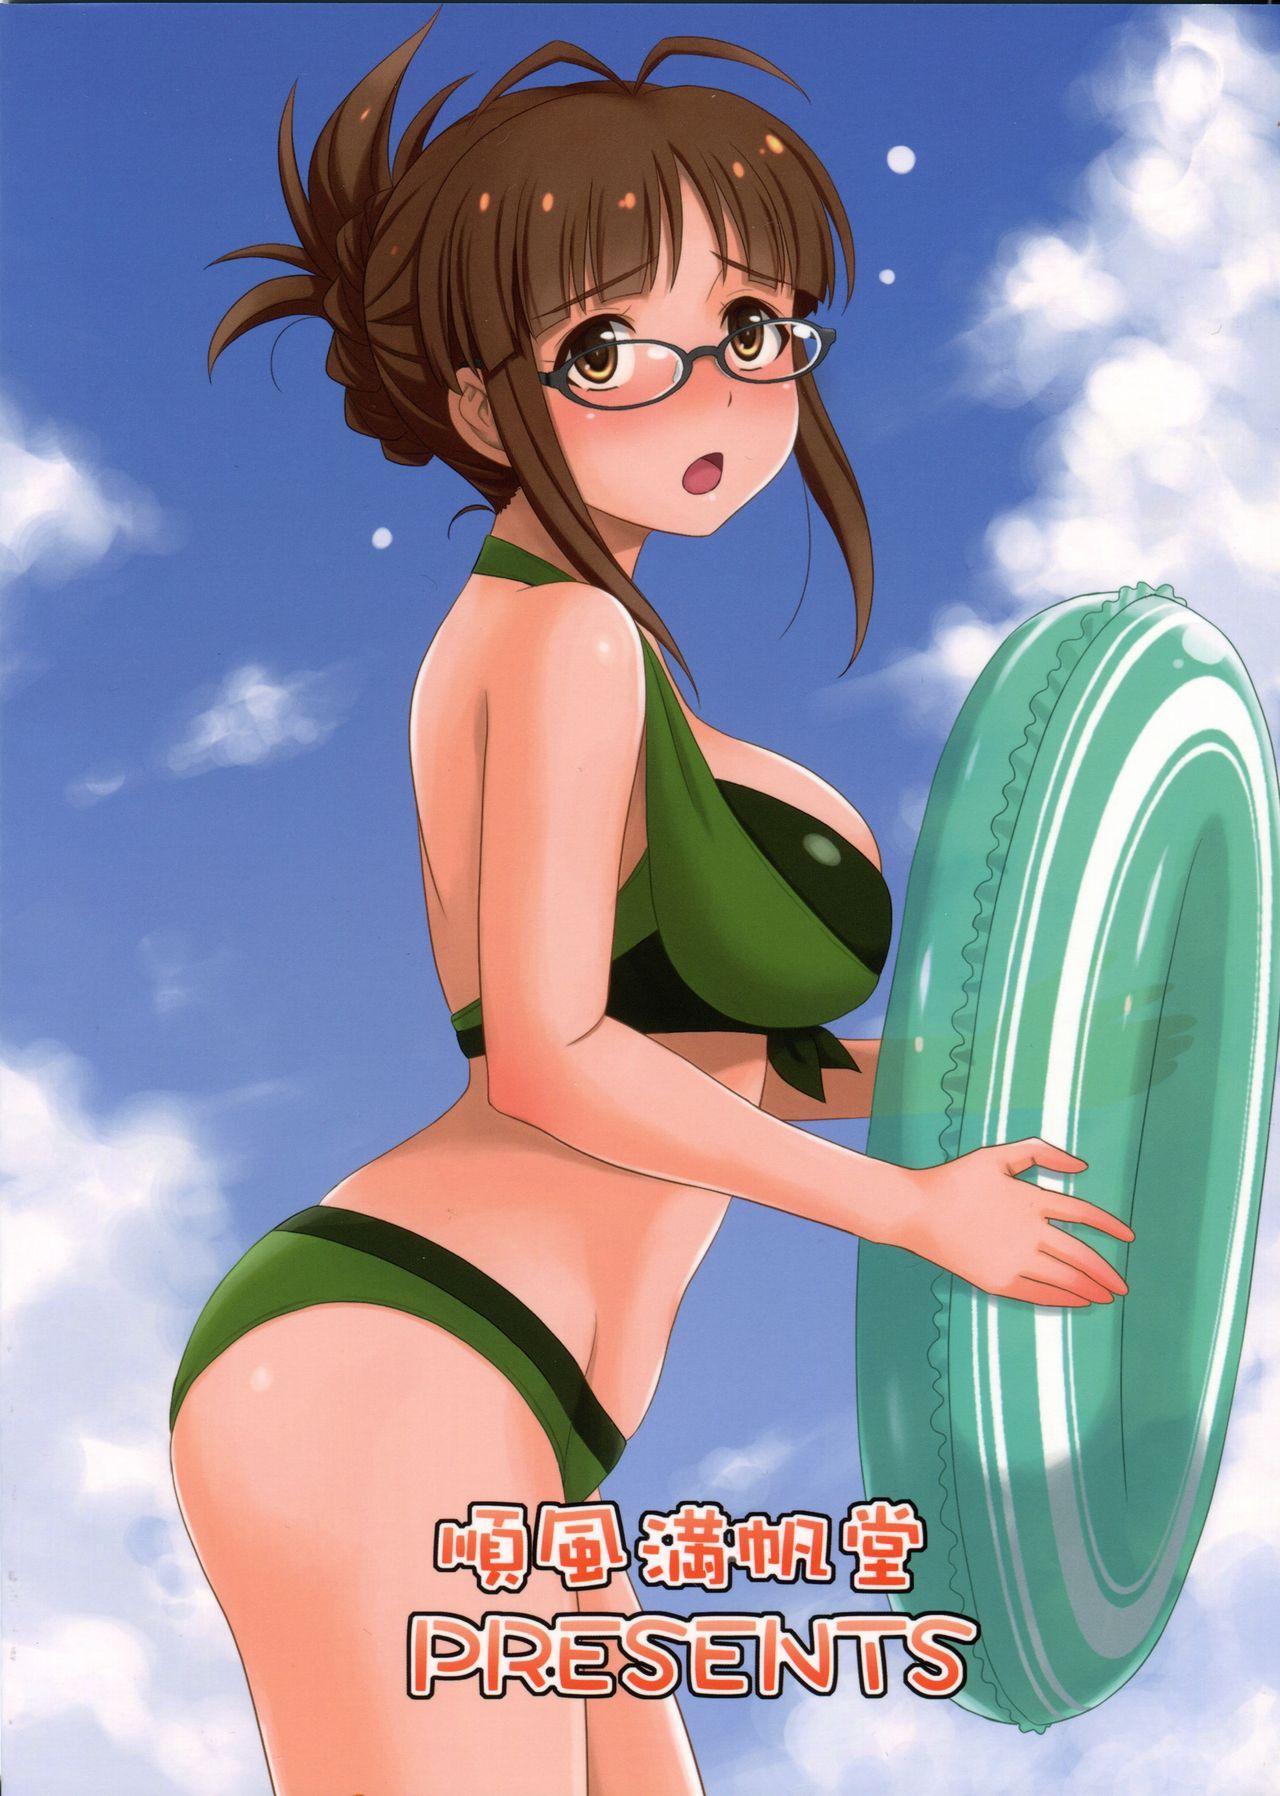 Ex Girlfriends Training for You! - The idolmaster Full Movie - Page 2